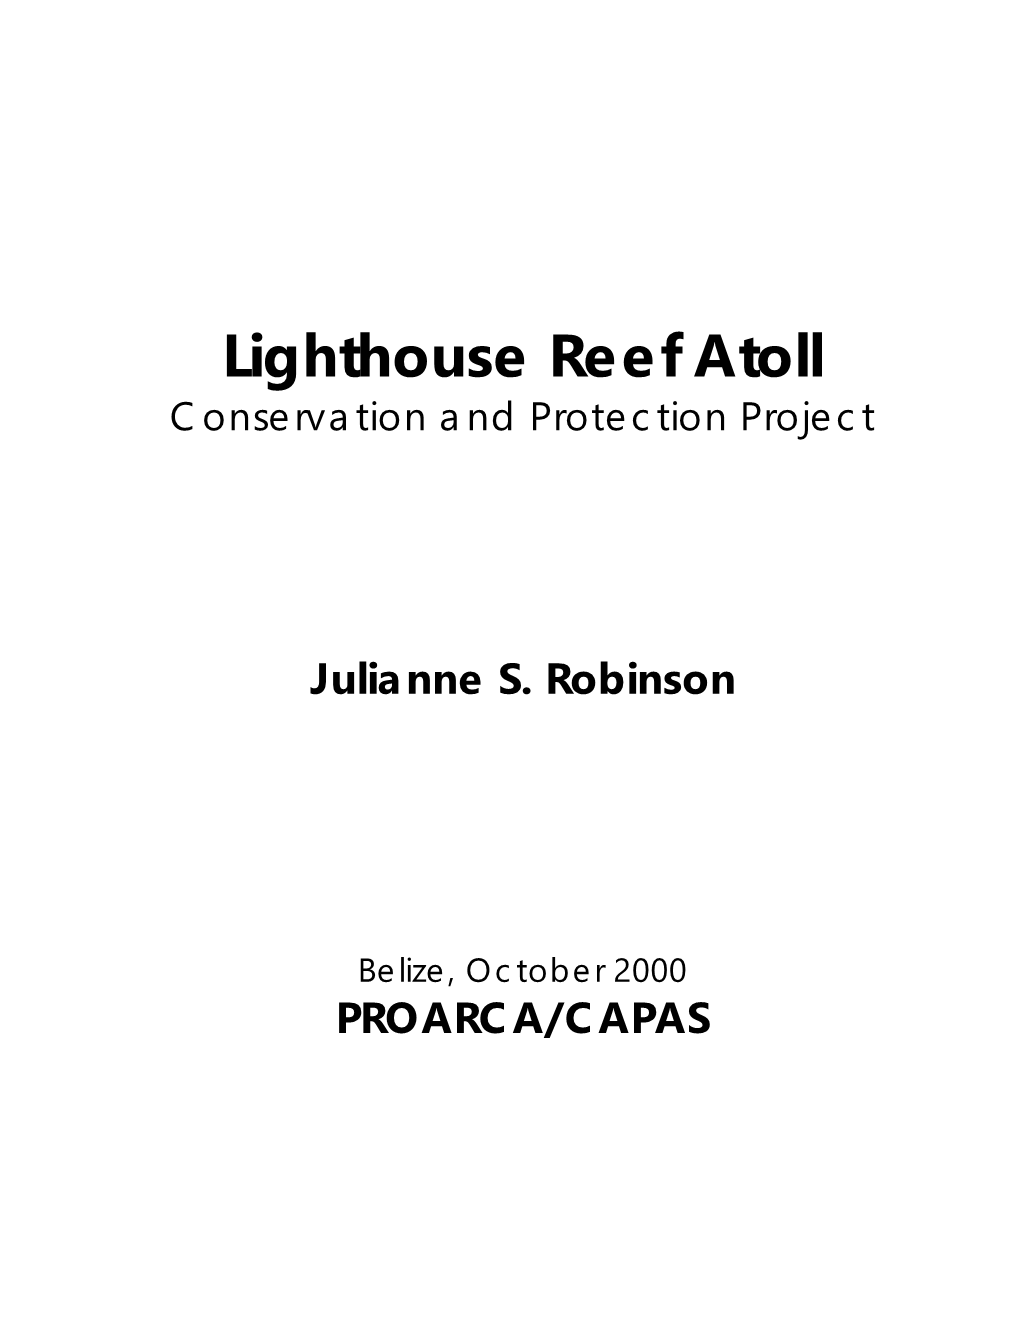 Lighthouse Reef Atoll Conservation and Protection Project